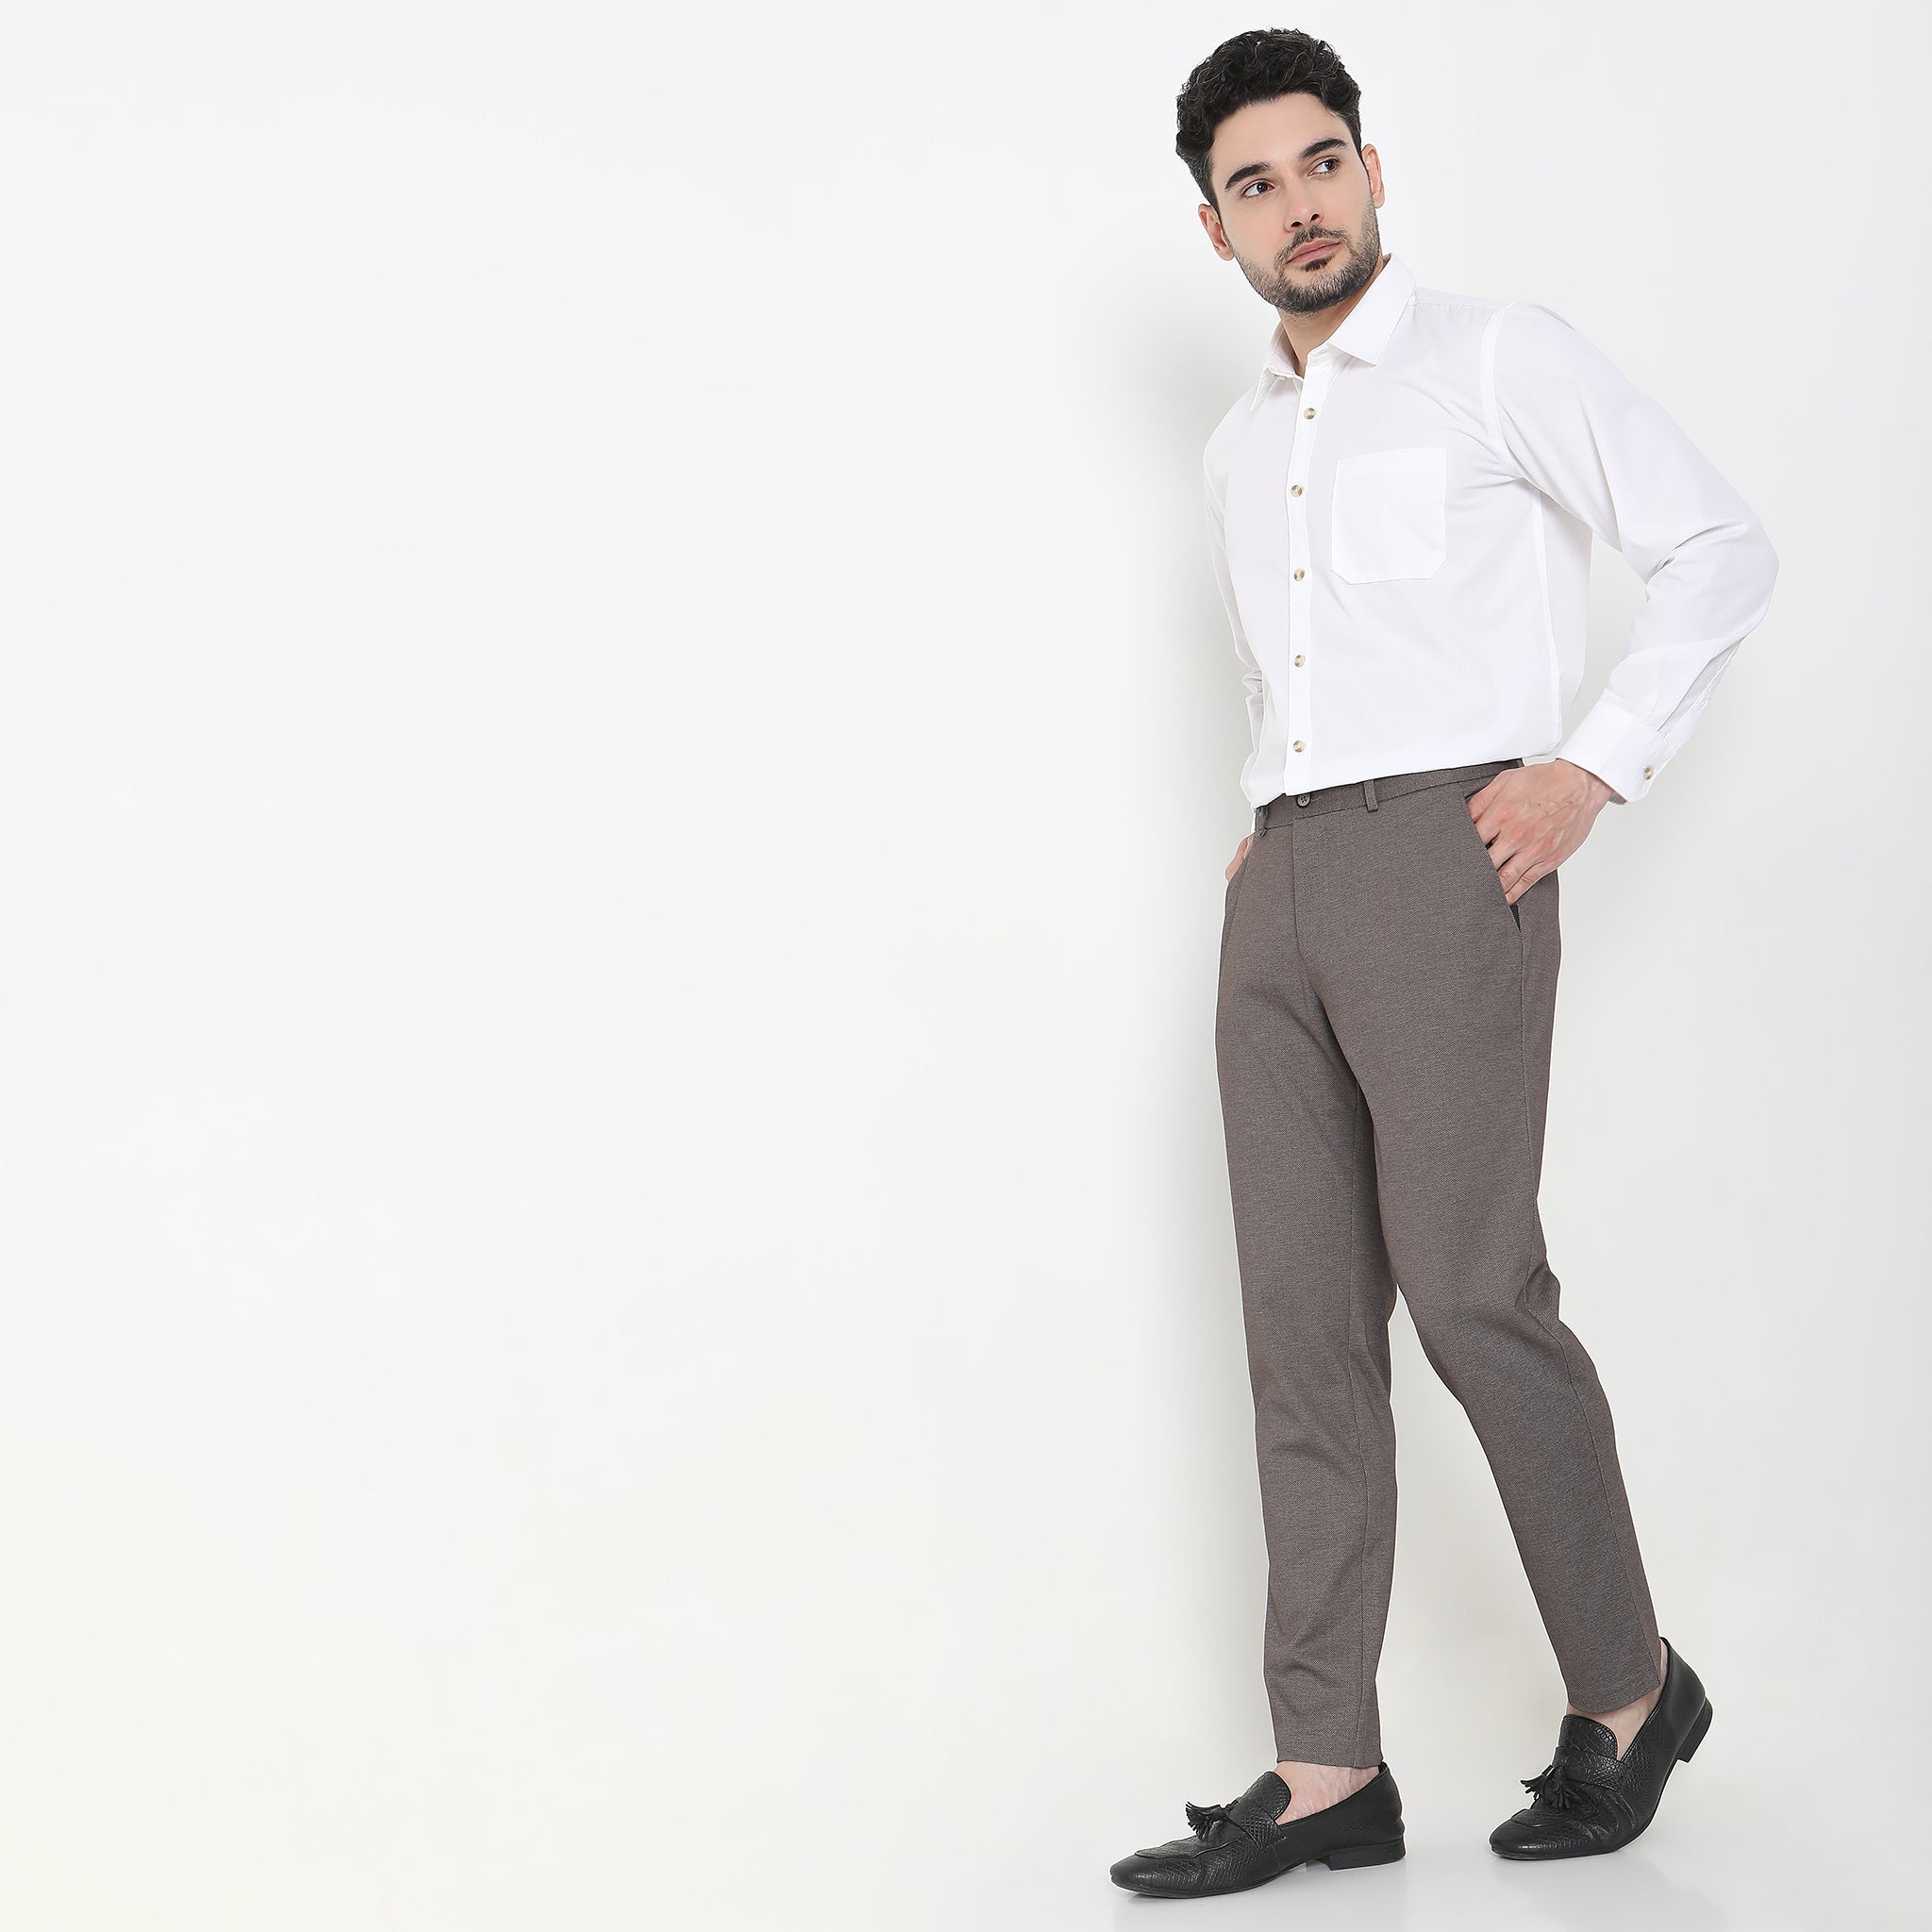 Trousers For Men: Buy Trouser Pants For Men Online in India - Style Union